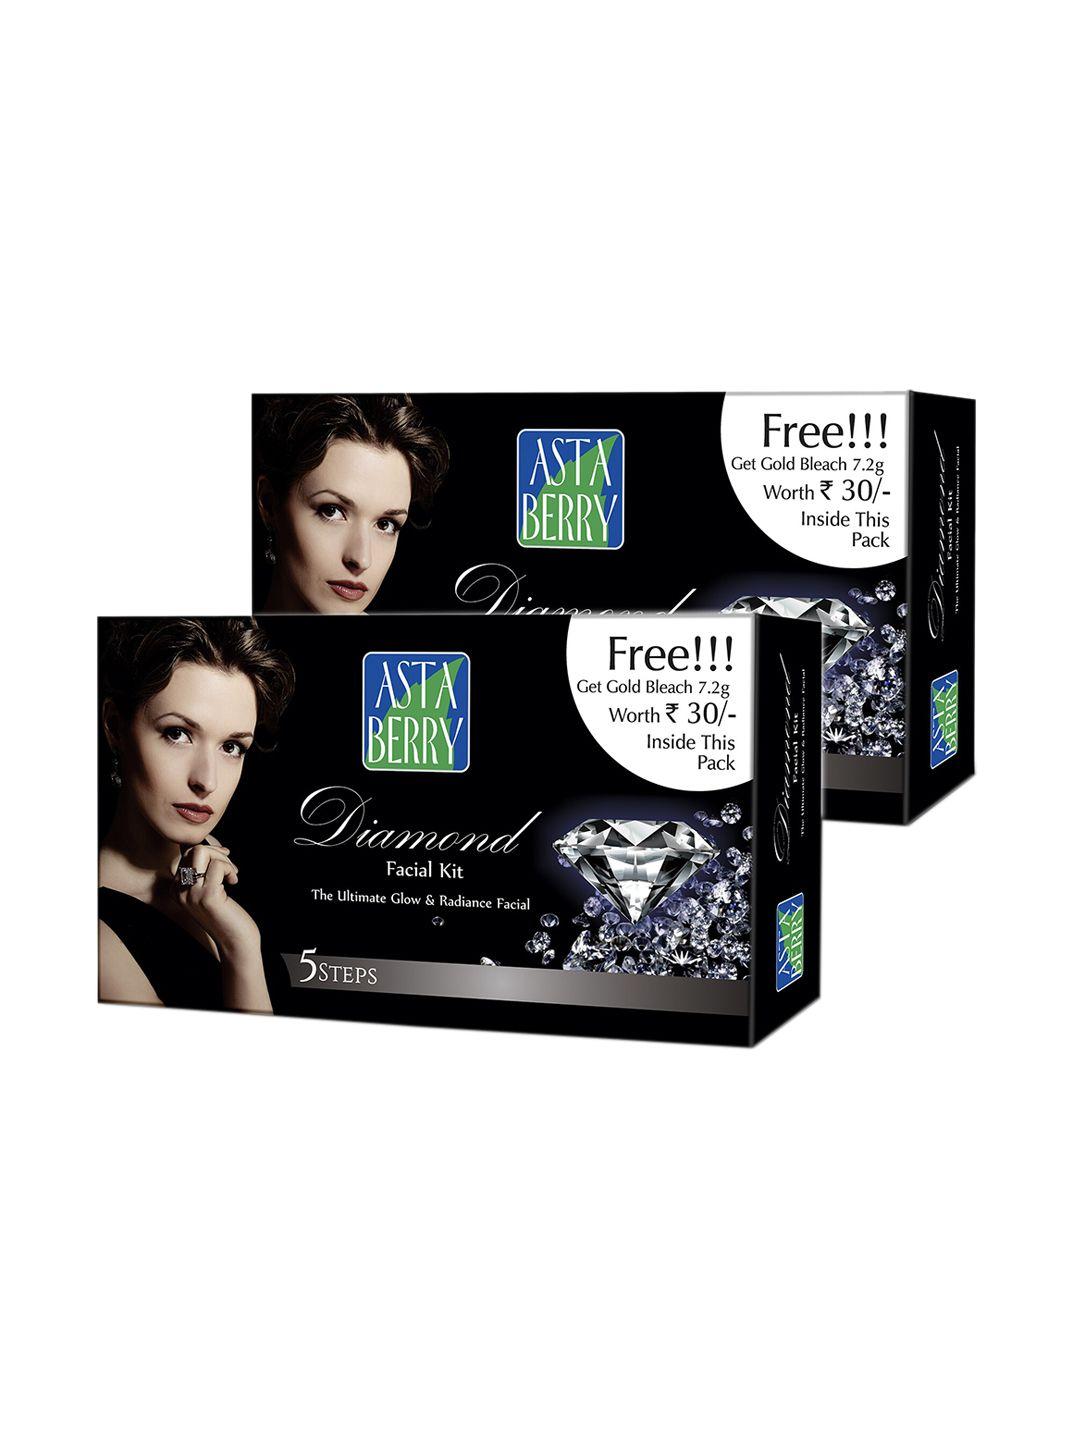 astaberry set of 2 diamond facial kit with free gold bleach